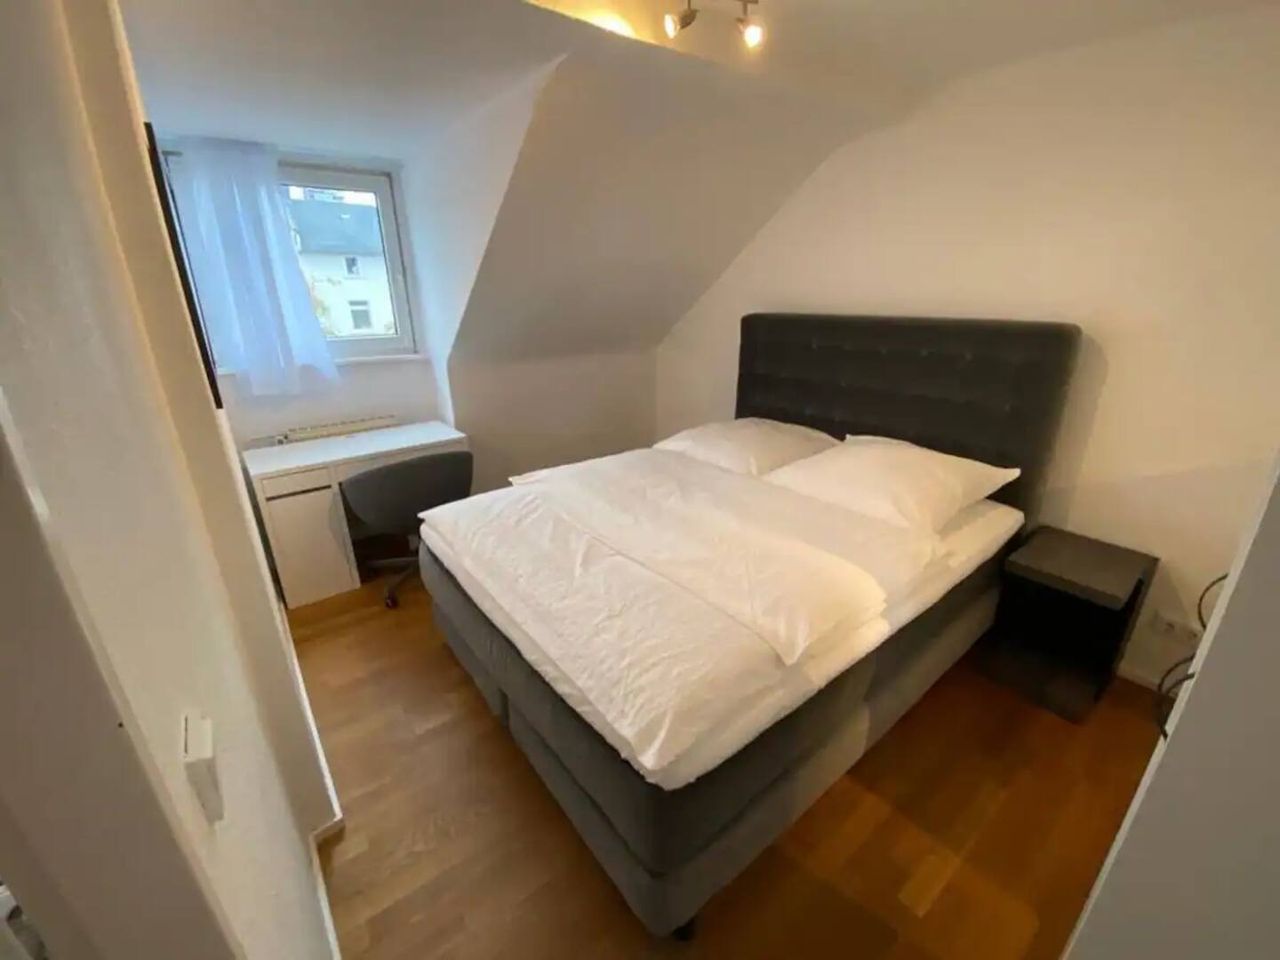 Luxurious 3 Bedroom apartment in the middle of Frankfurt district